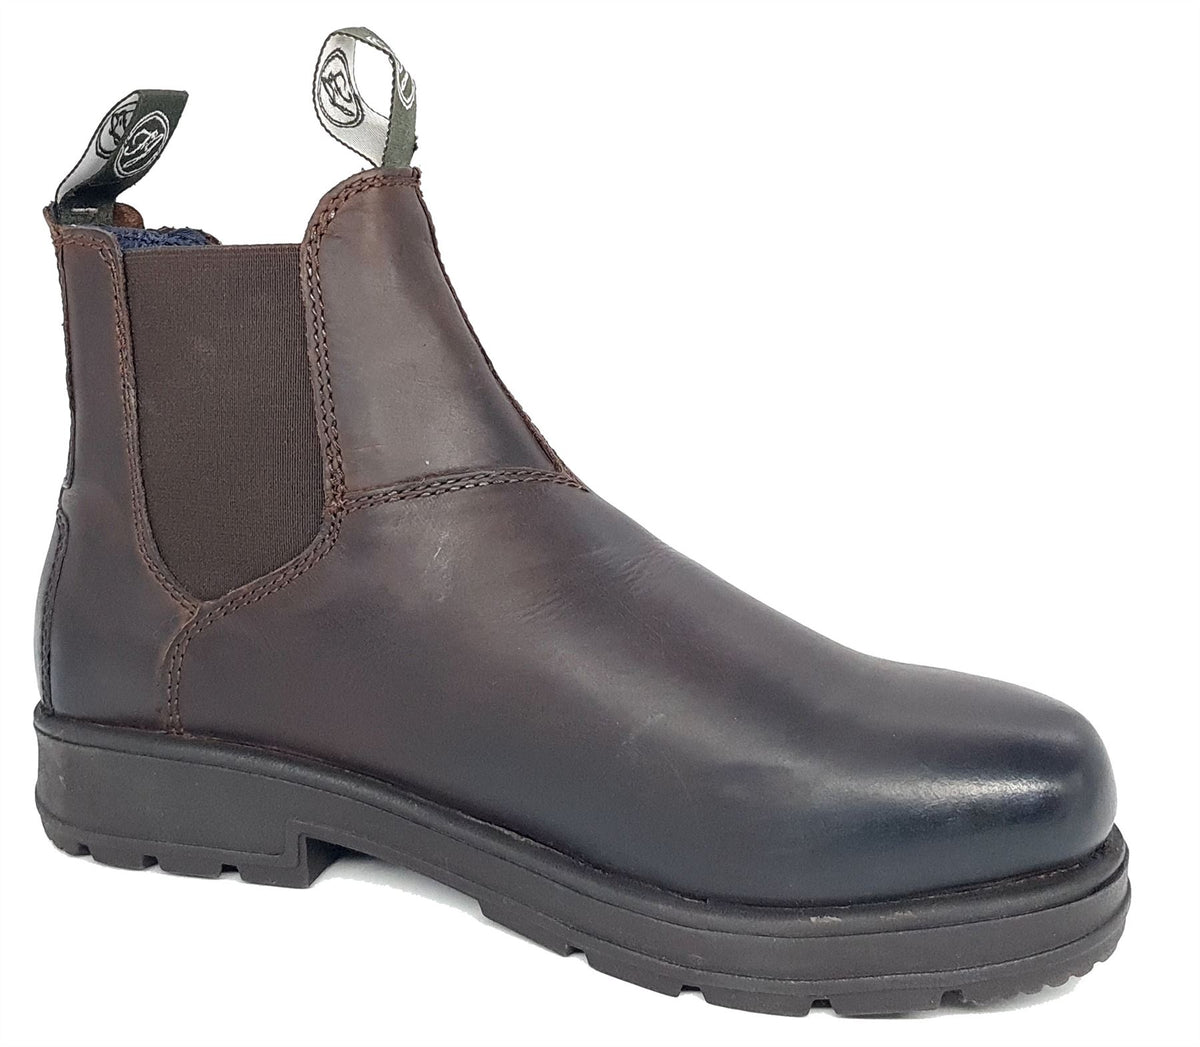 Frank James Braunton Men's Greasy Brown Pull On Chelsea Boots